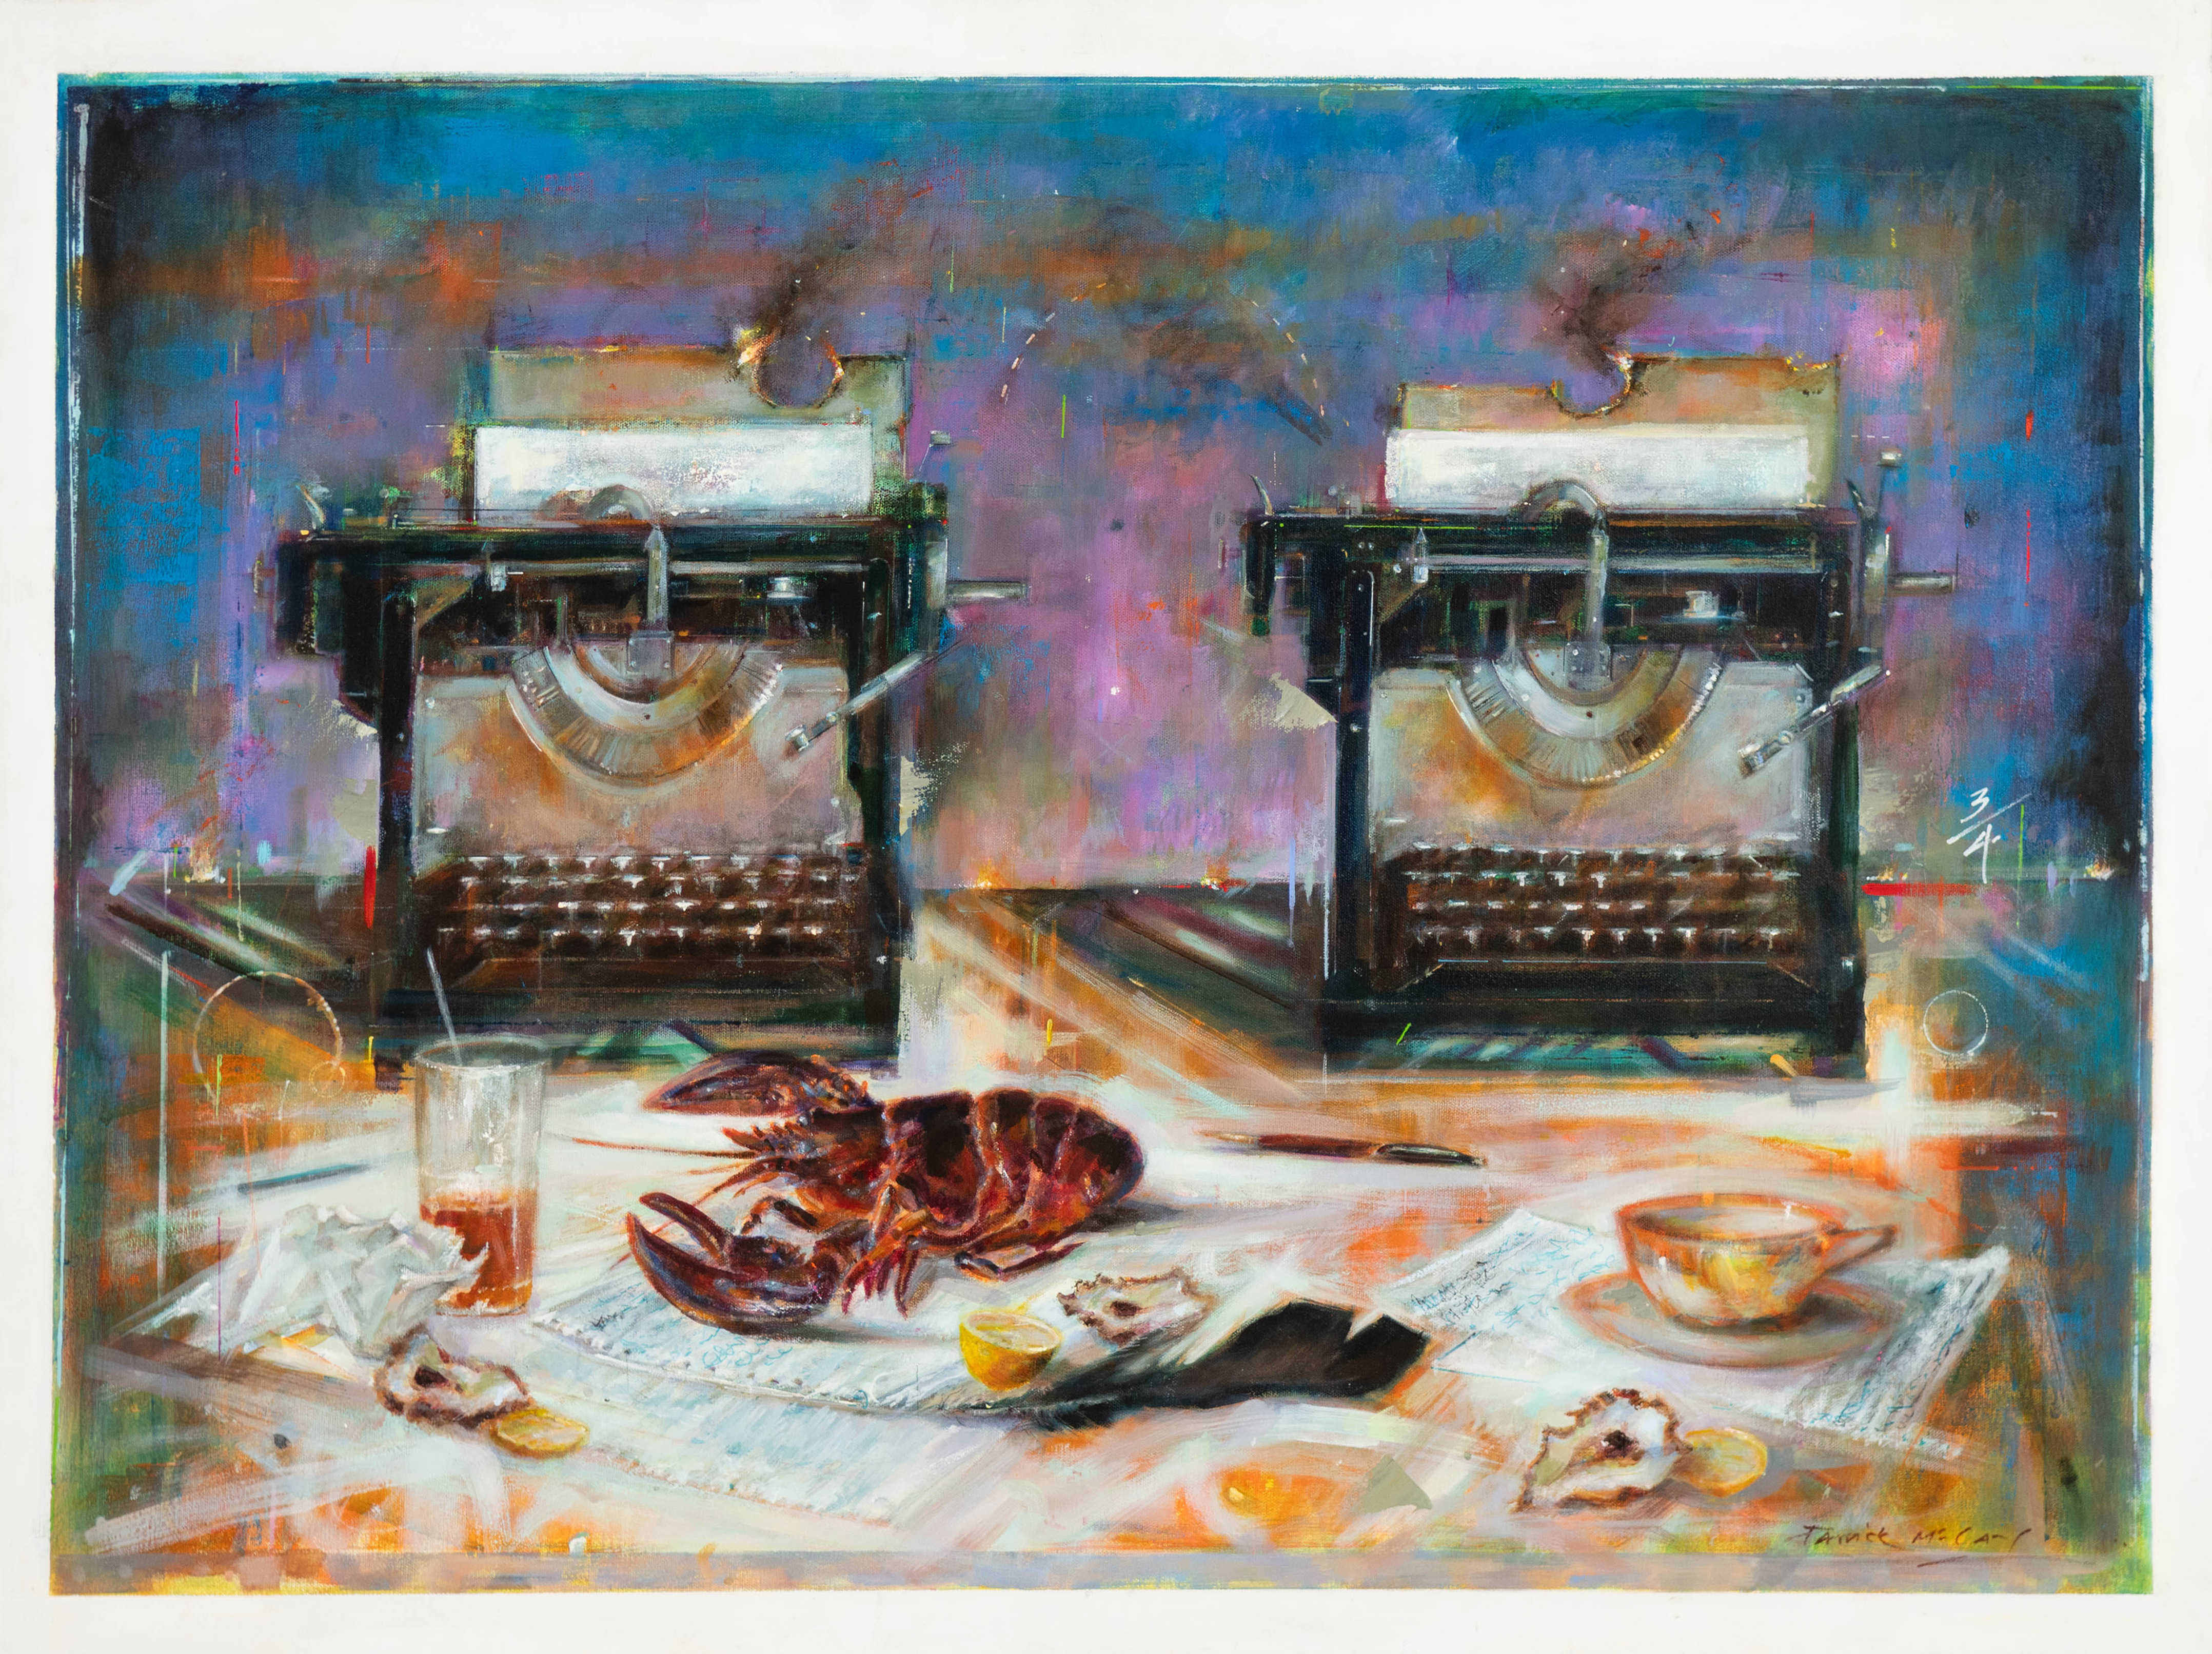 Patrick McCay's "Writers on a New England Stage." Two typewriters are side by side, the paper on both is slightly smoking. In front of the typerwriters are a collection of assorted items, including a lobster, a half-empty glass of orange liquid, oyster shells, a tea cup with saucer, and a black feather. All the items are on top of sheets of white paper.